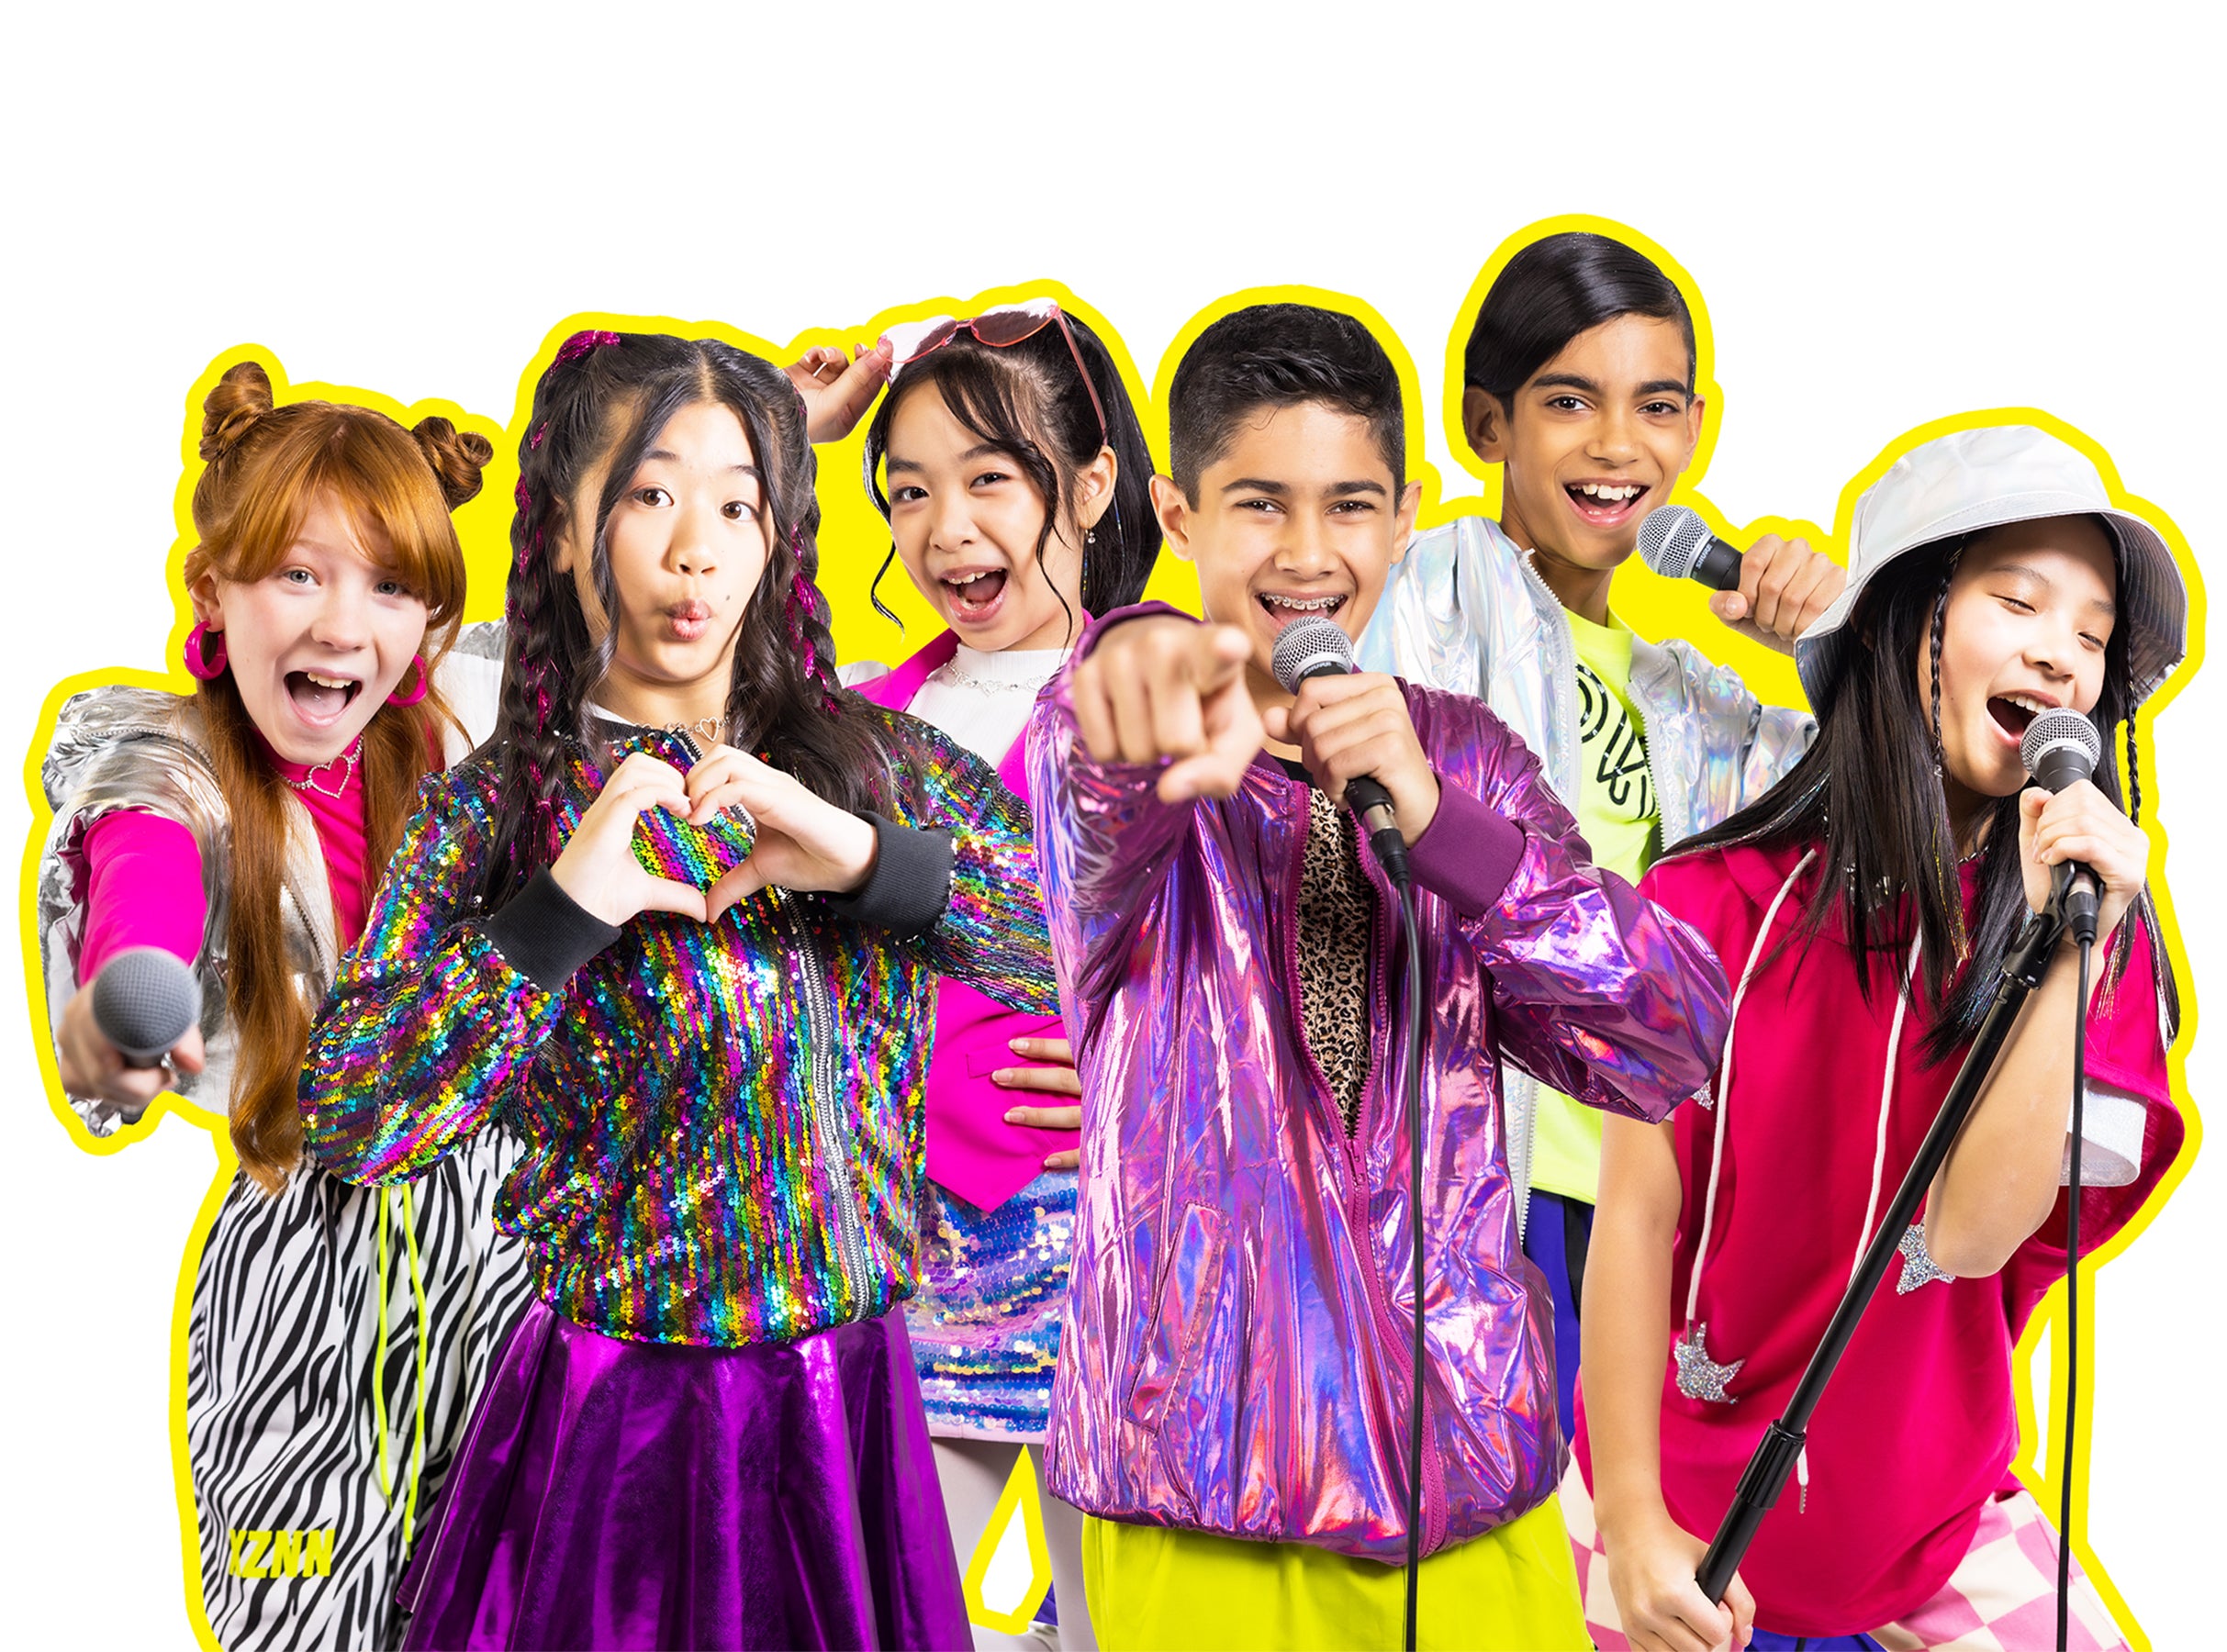 Mini Pop Kids Live - The Good Vibes Tour in Toronto promo photo for Dance presale offer code